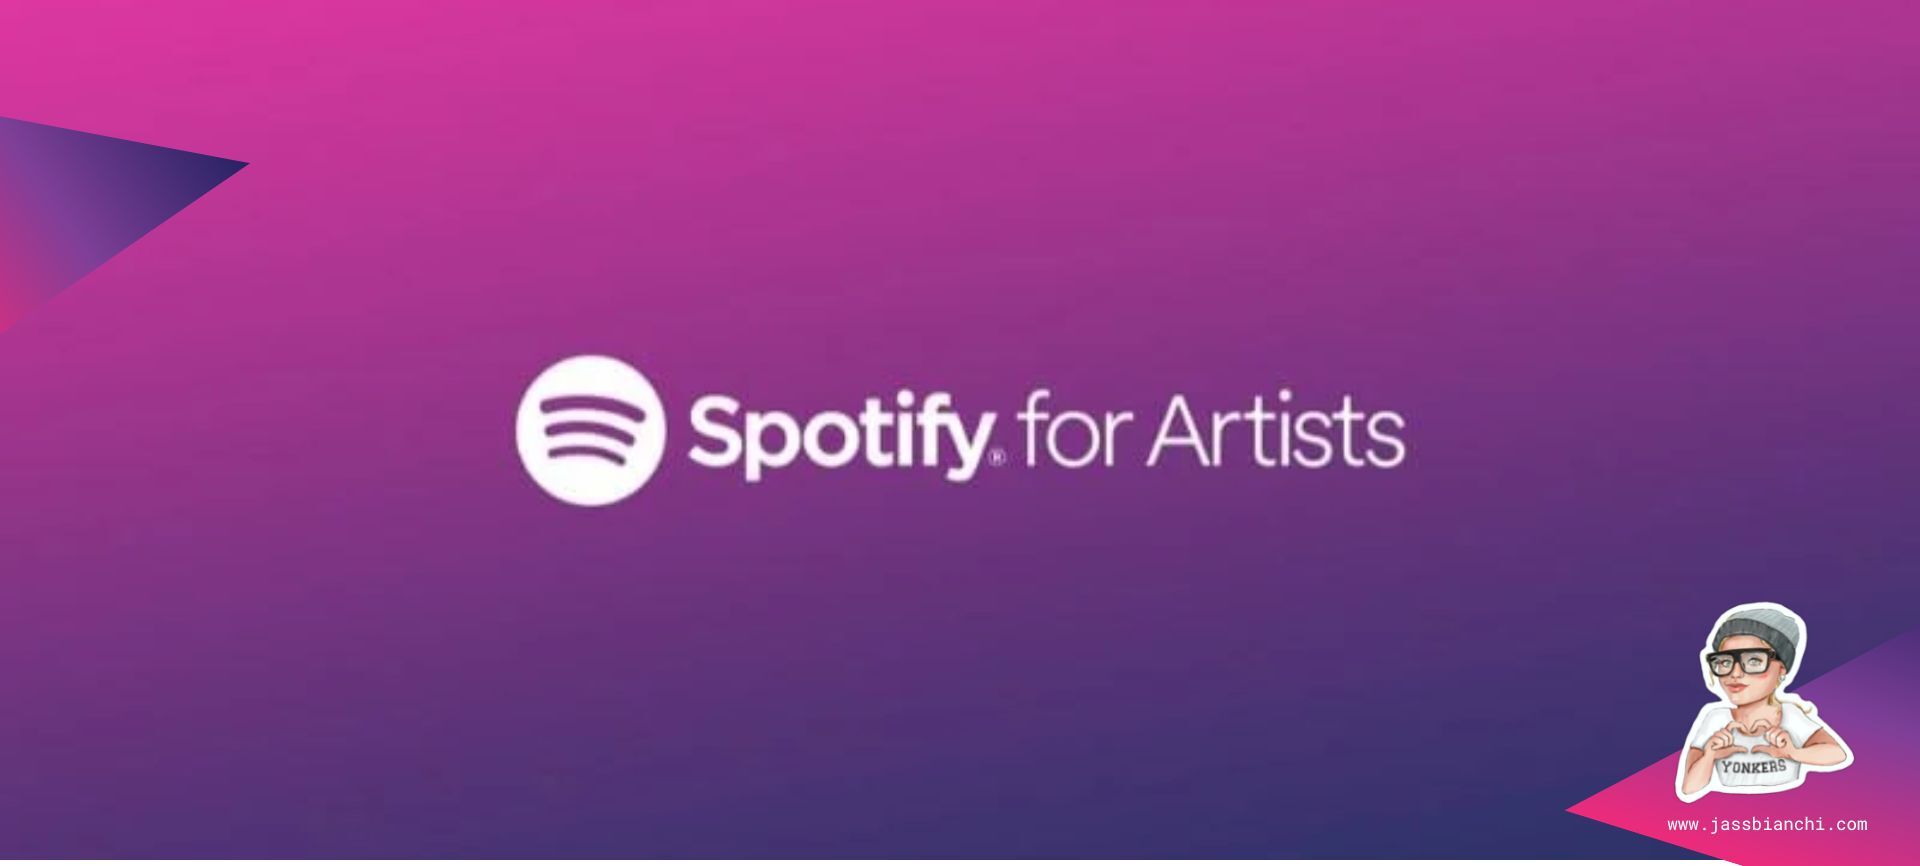 Spotify for Artists is a service that helps musicians expand their musical presence and reach their target markets.